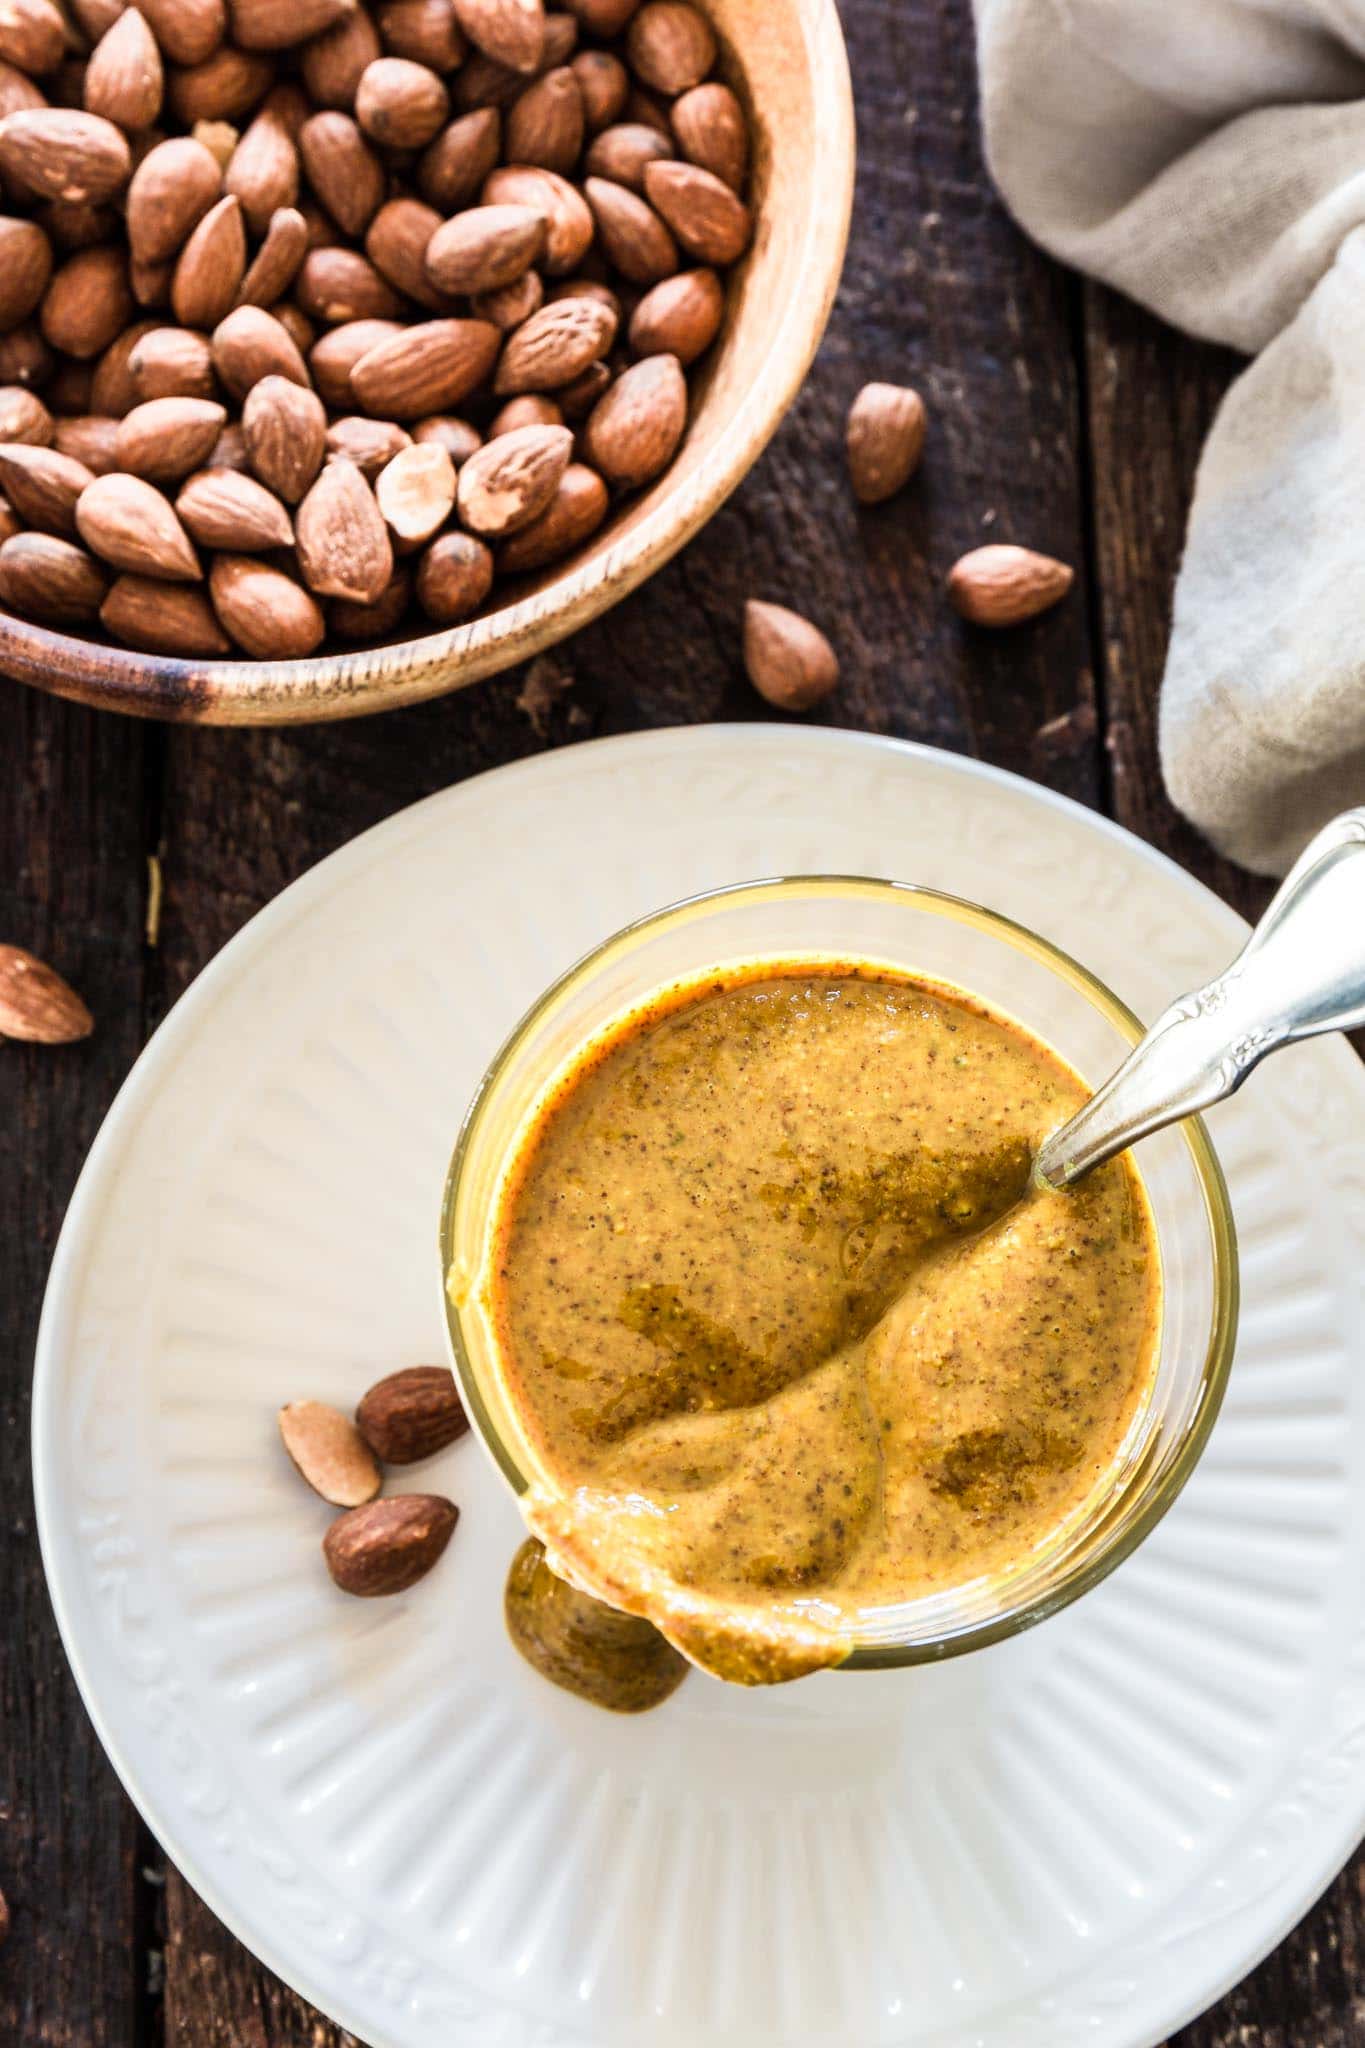 Turmeric Almond Butter | www.oliviascuisine.com | Nut butter lovers, rejoice! This almond butter mixed with turmeric is everything you’re looking for: creamy, salty and good for you, loaded with health benefits from both the almonds and the turmeric.